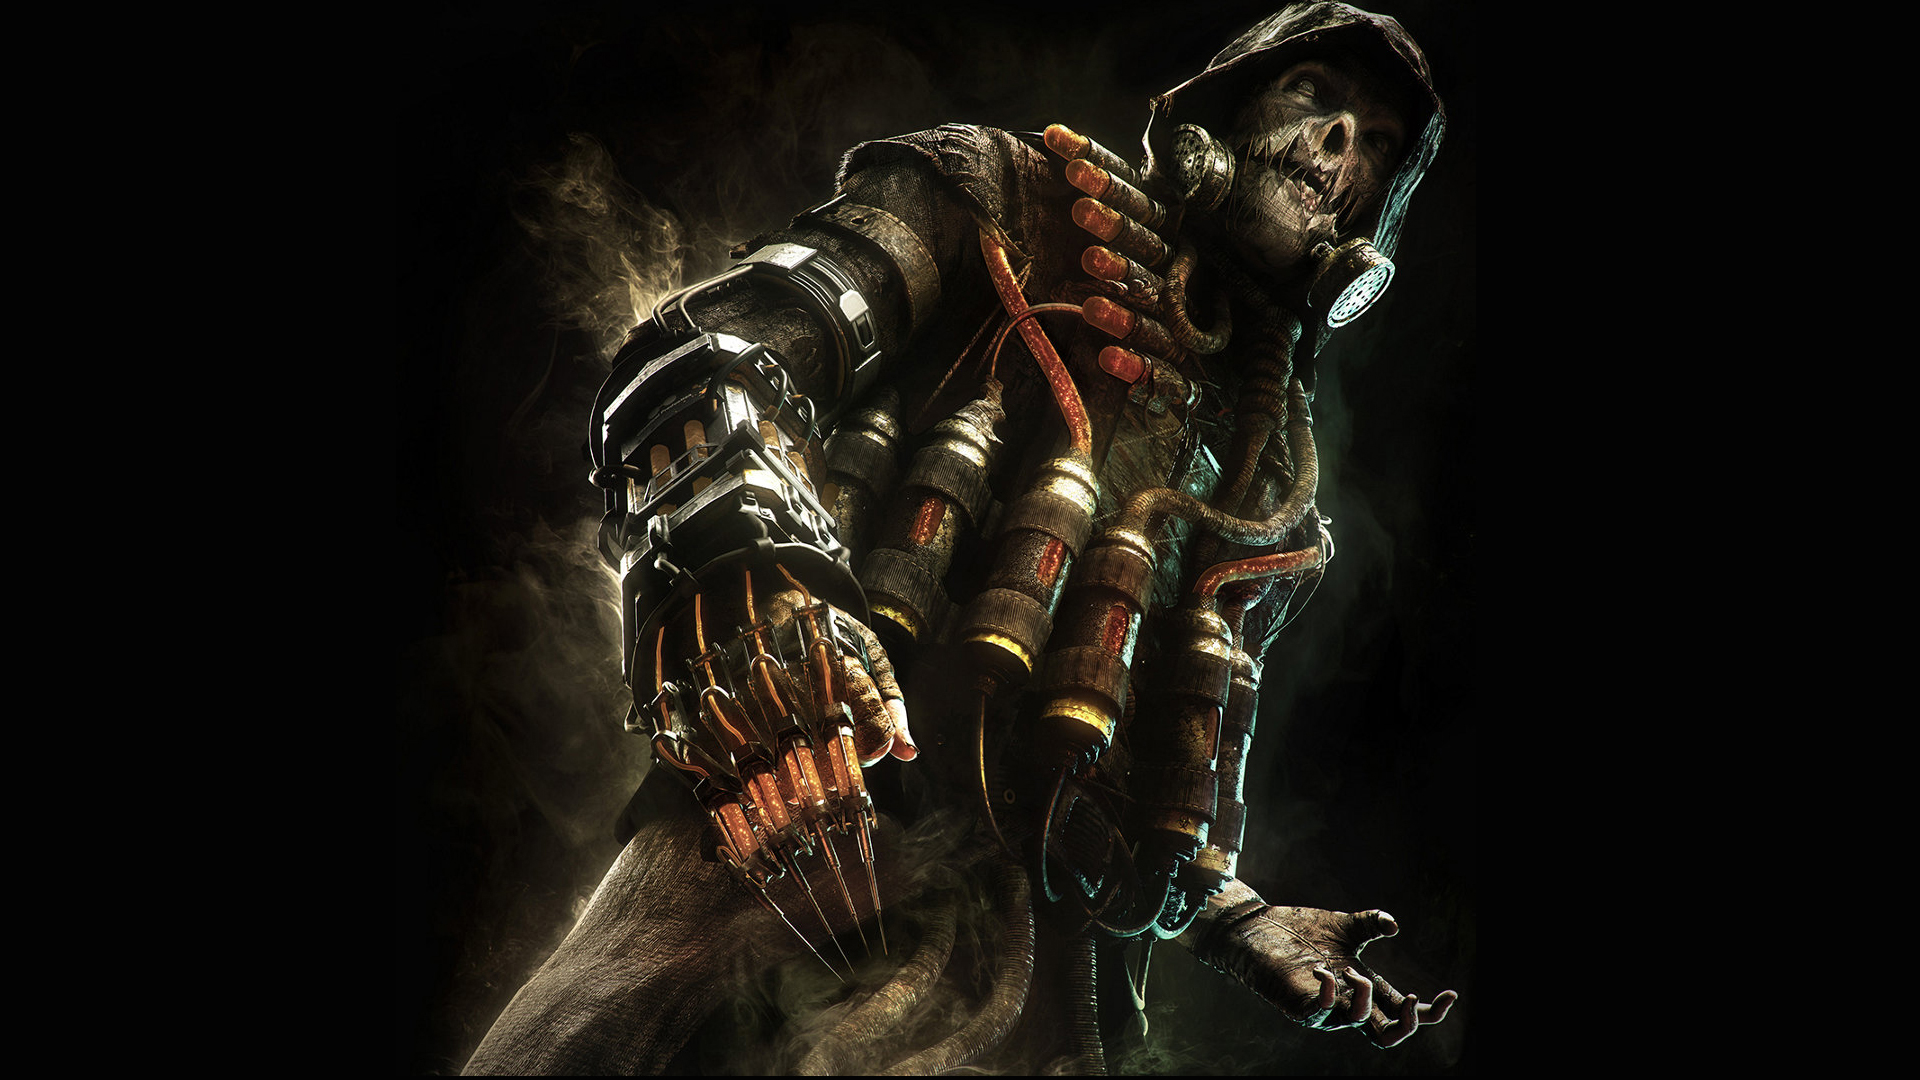 Scarecrow Full HD Quality Wallpaper Widescreen